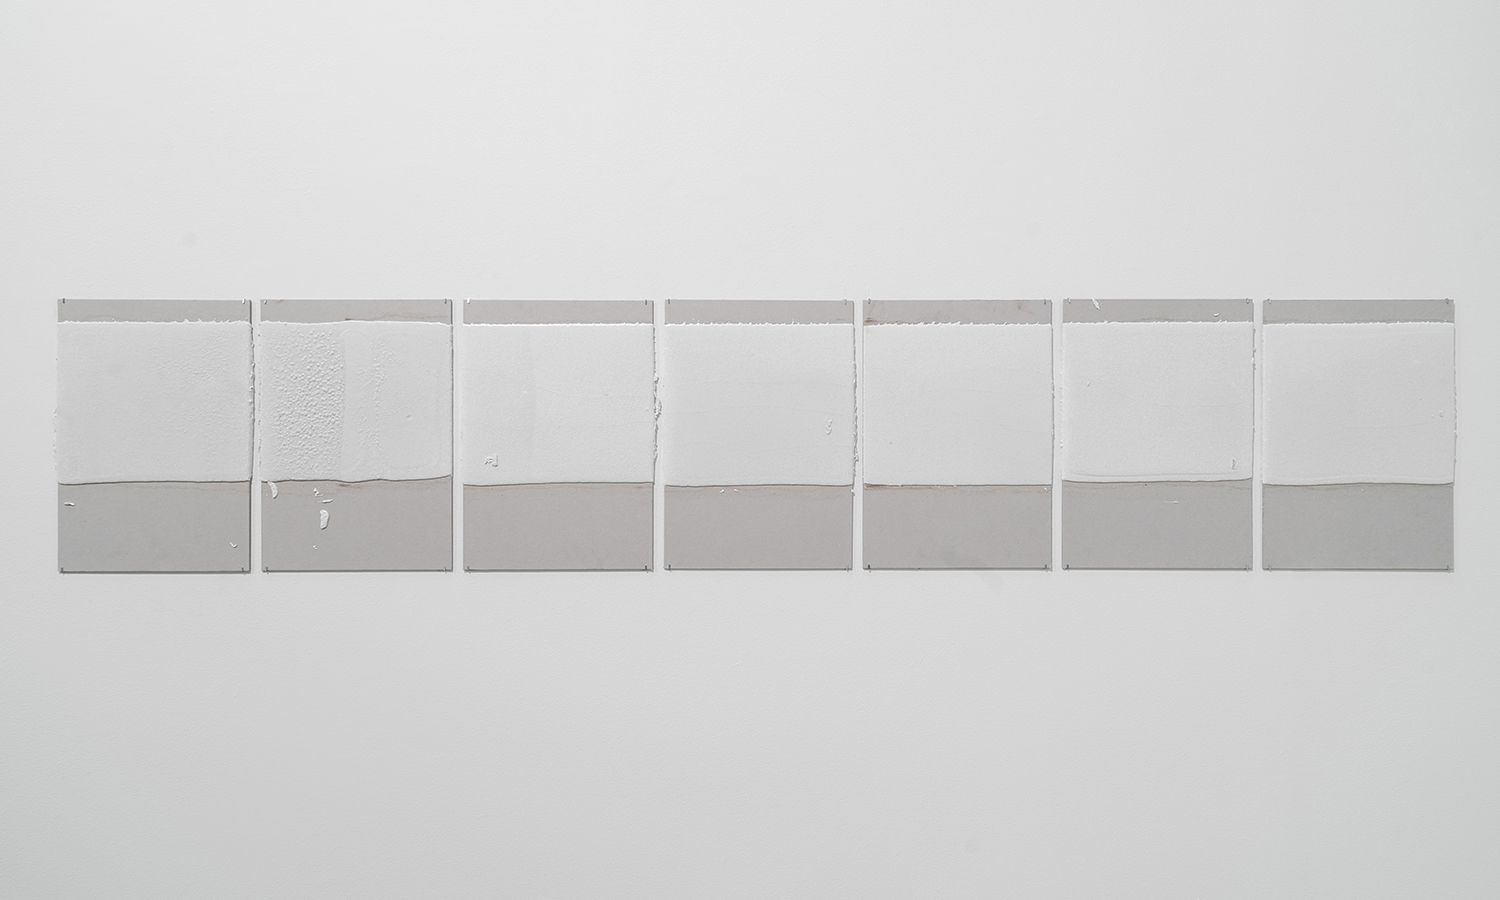   300mm (section) (W), 5mm (T), White, Stop Line (601), Hand Marking, Remarking, D88 Omar Bin Al Khattab St, LP 47,  2017  Set of 7 works  Thermoplastic paint and reflective glass particles on grey boards  50 x 35 cm each 